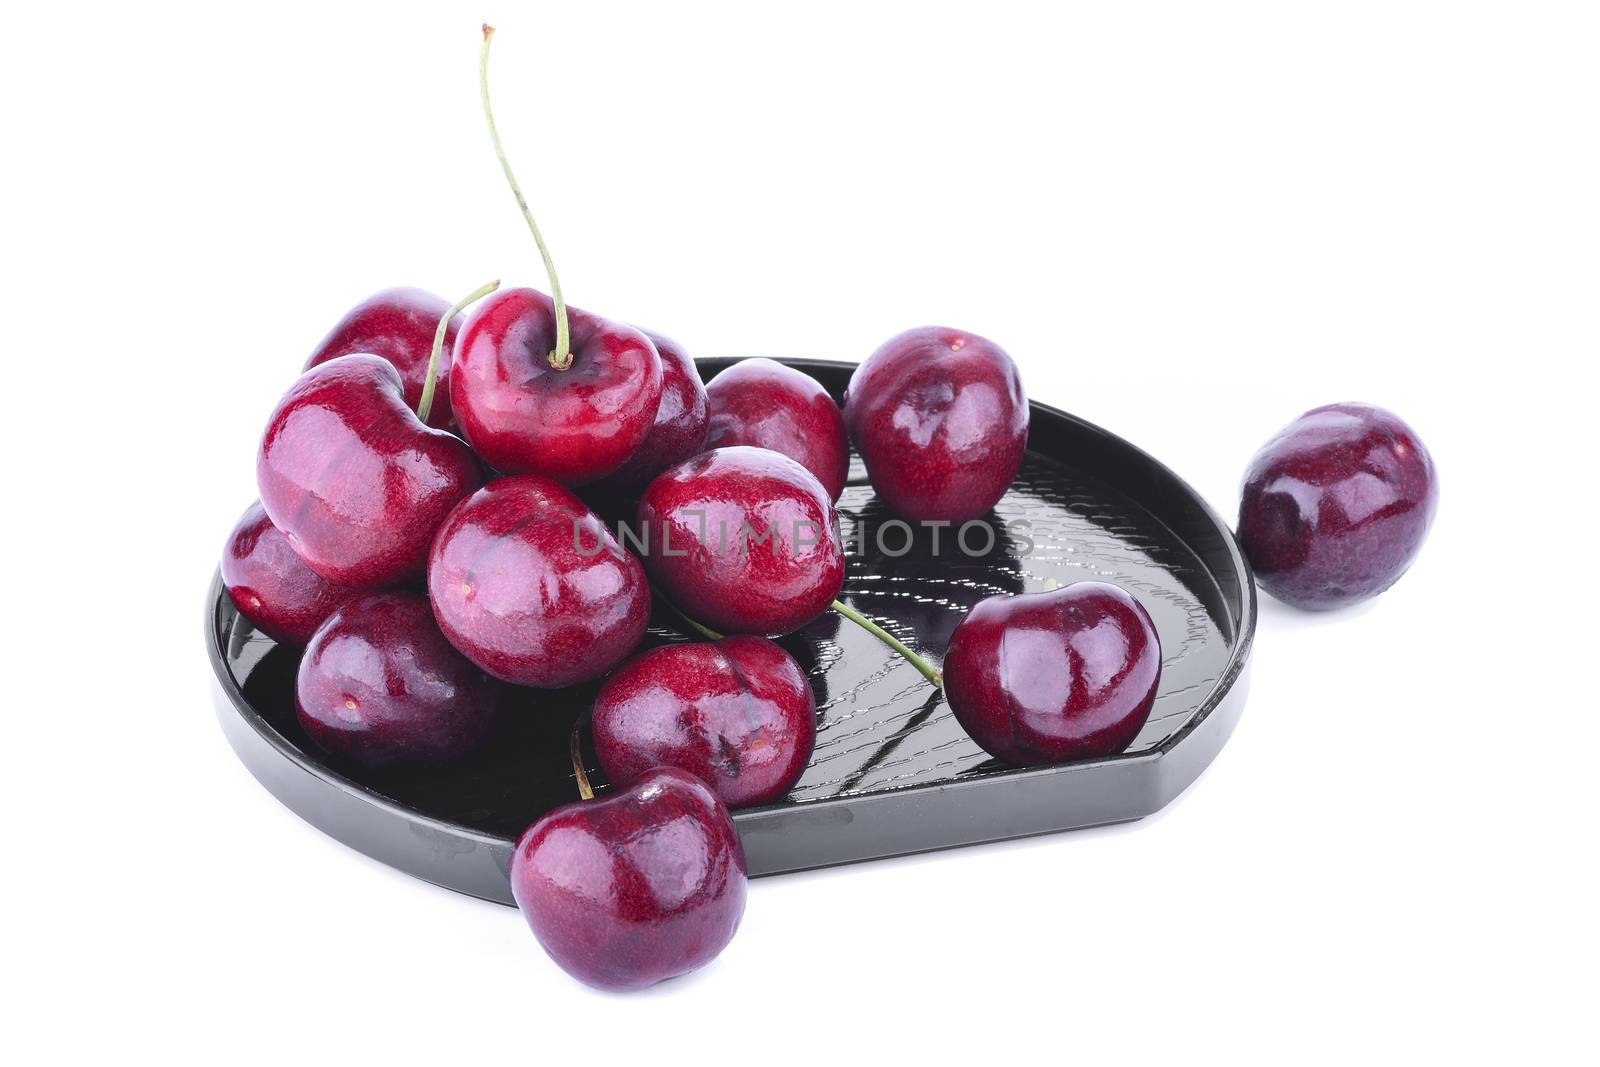 Ripe purple cherry on plate, isolated on white background